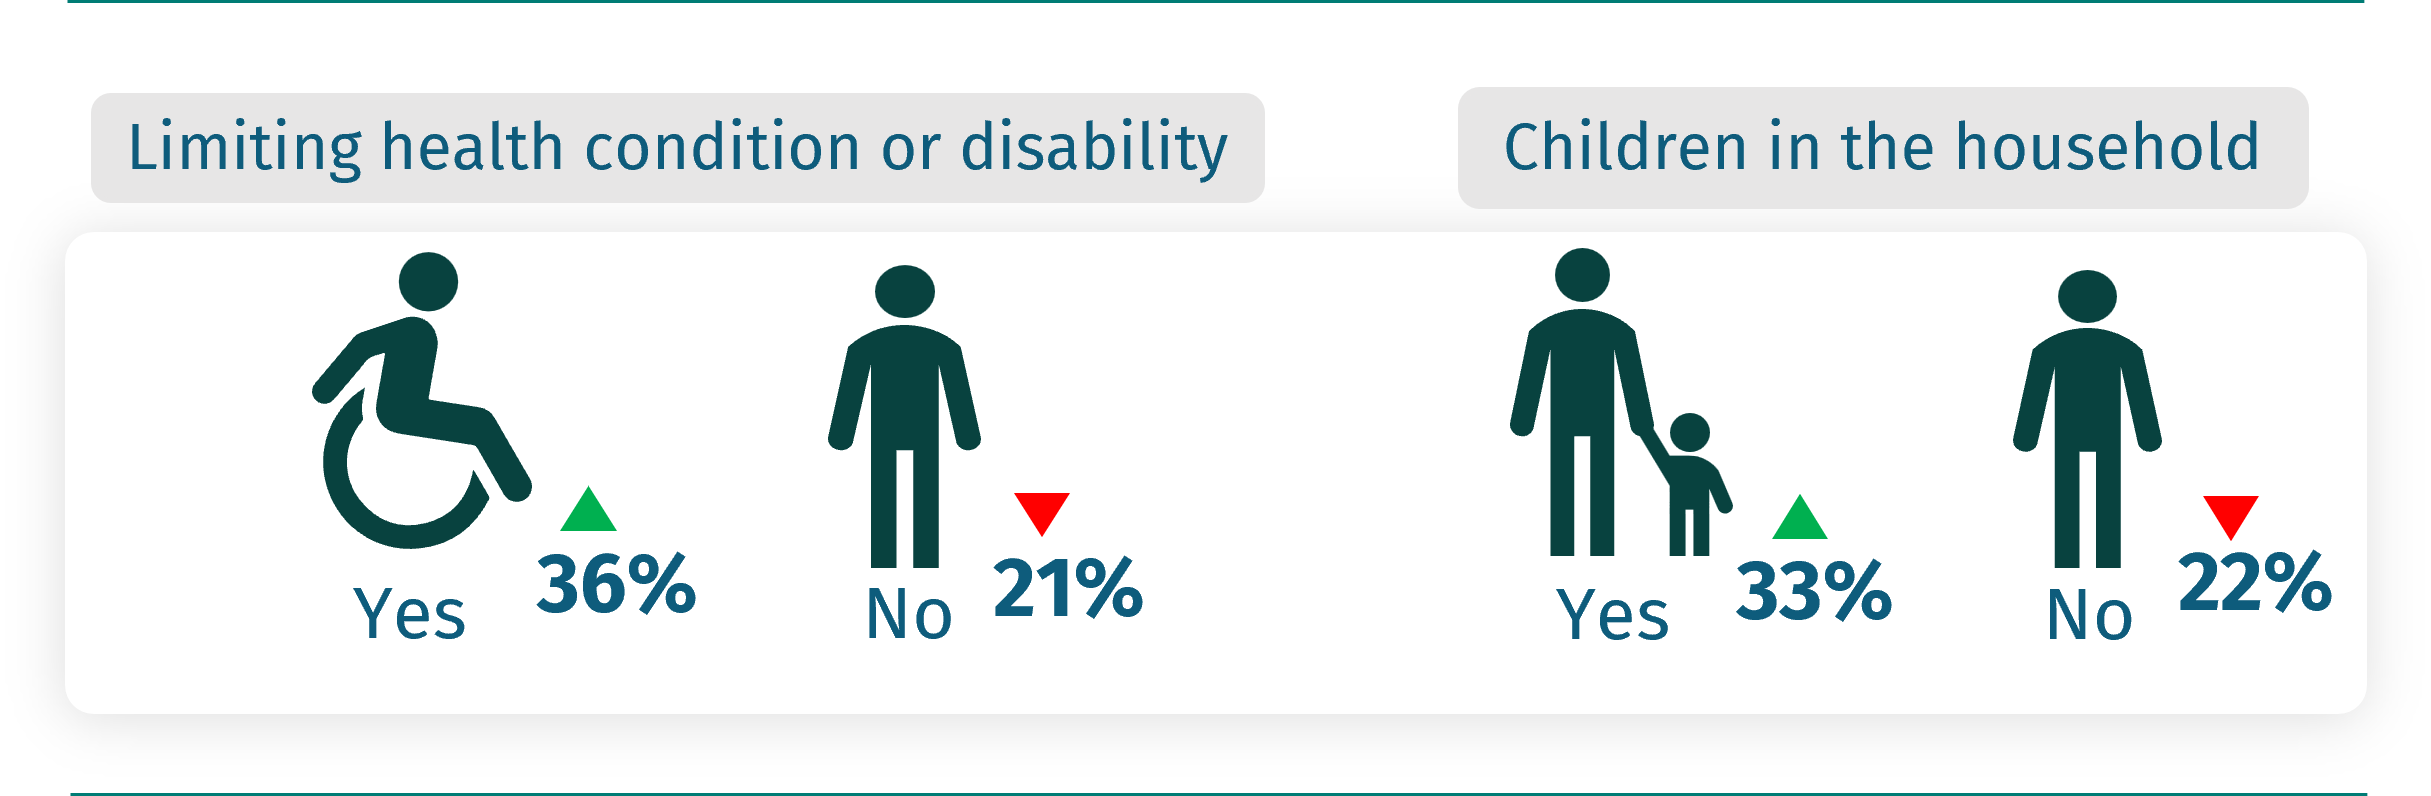 The icons show differences in concern over food affordability by disability status and whether people have children in the household. 36% of those with a limiting health disability are concerned, compared to 21% without. 33% of those with children in the household are concerned, compared to 22% without.  Limiting health condition or disability 36% yes and 21% no and children in the household yes 33% and 22% no.